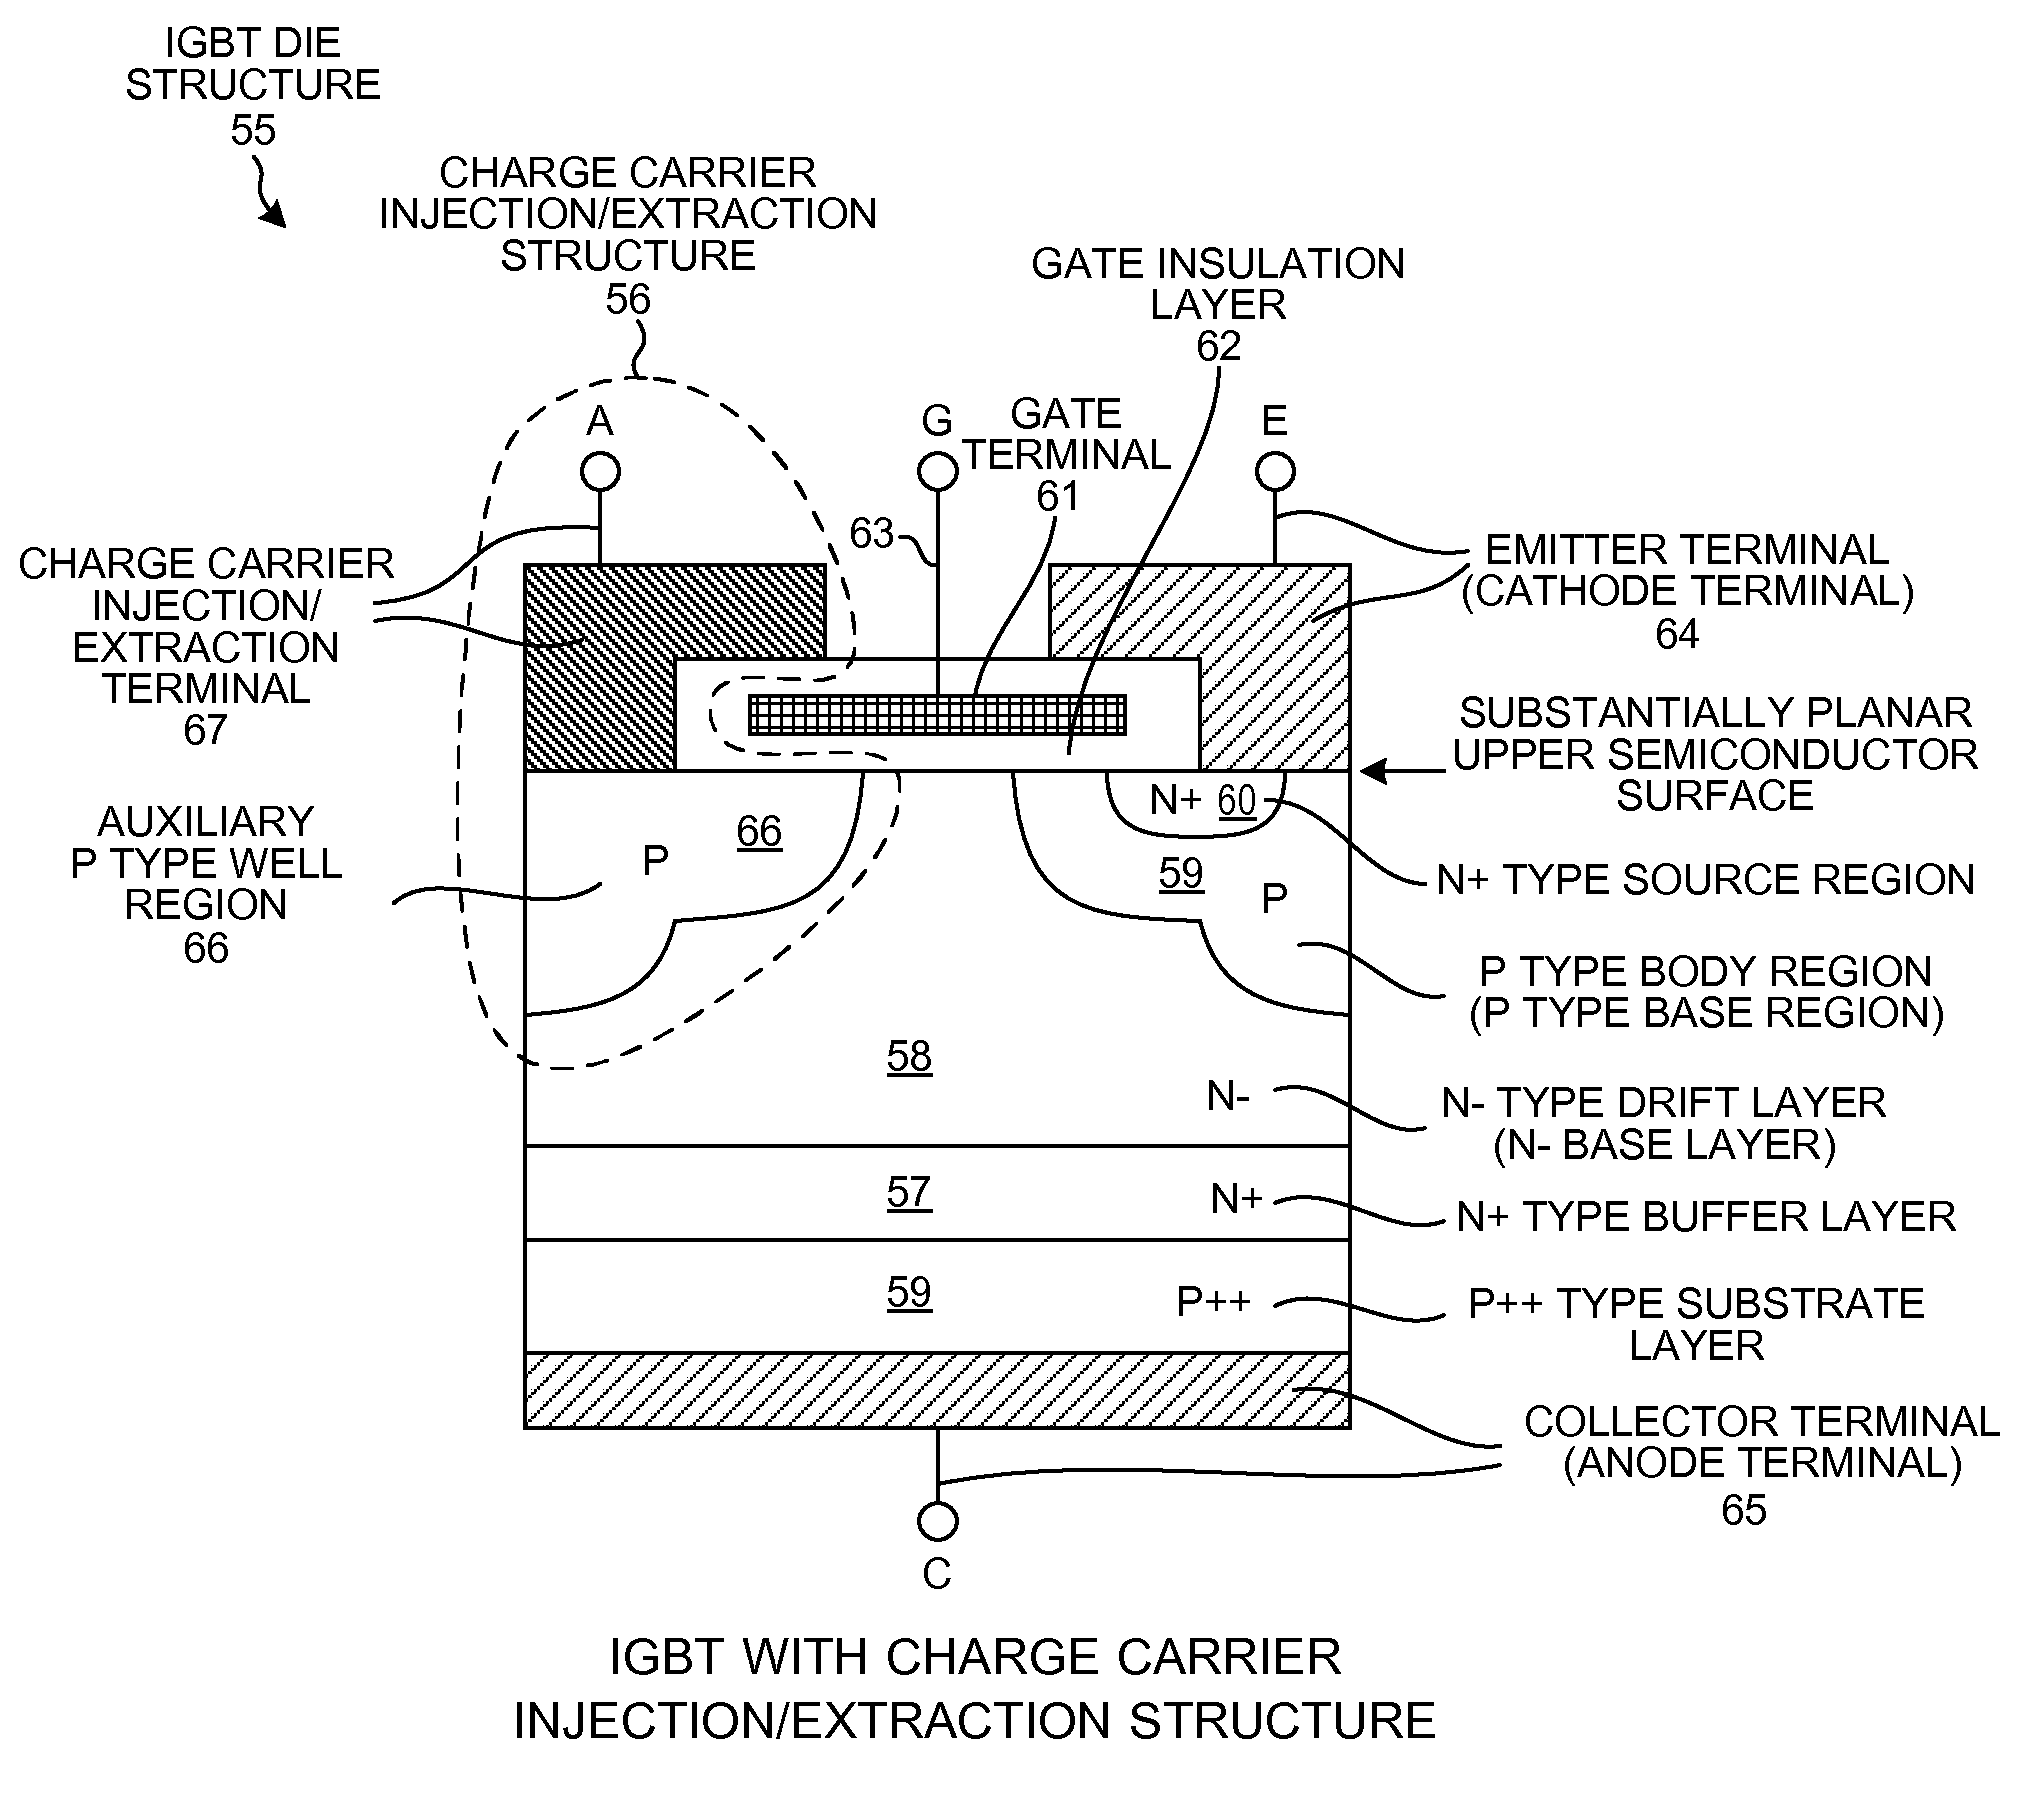 IGBT assembly having circuitry for injecting/extracting current into/from an auxiliary P well